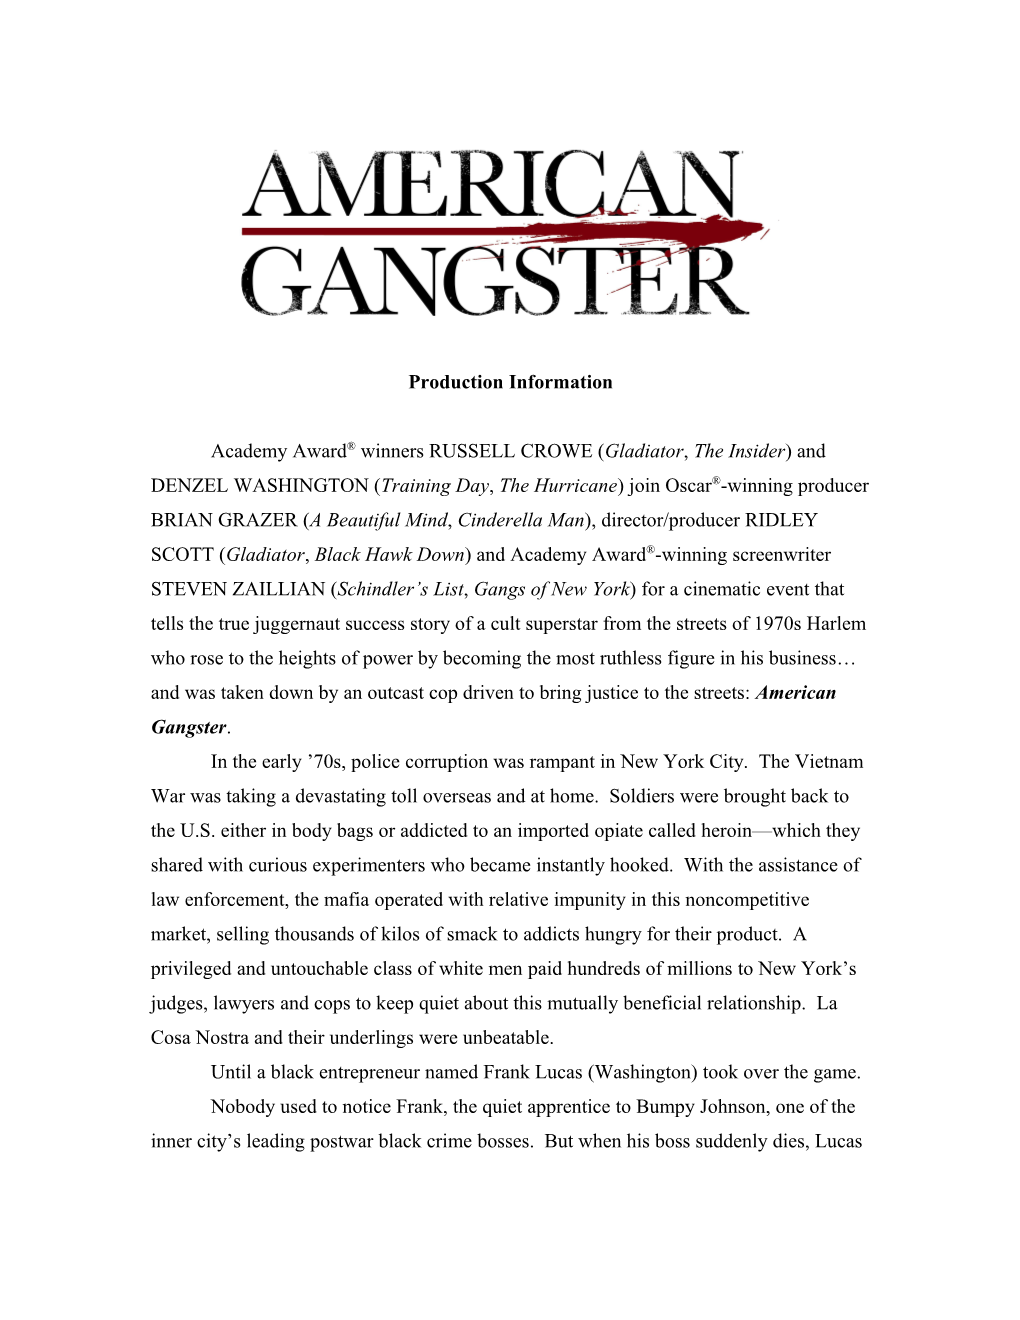 American Gangster Production Information